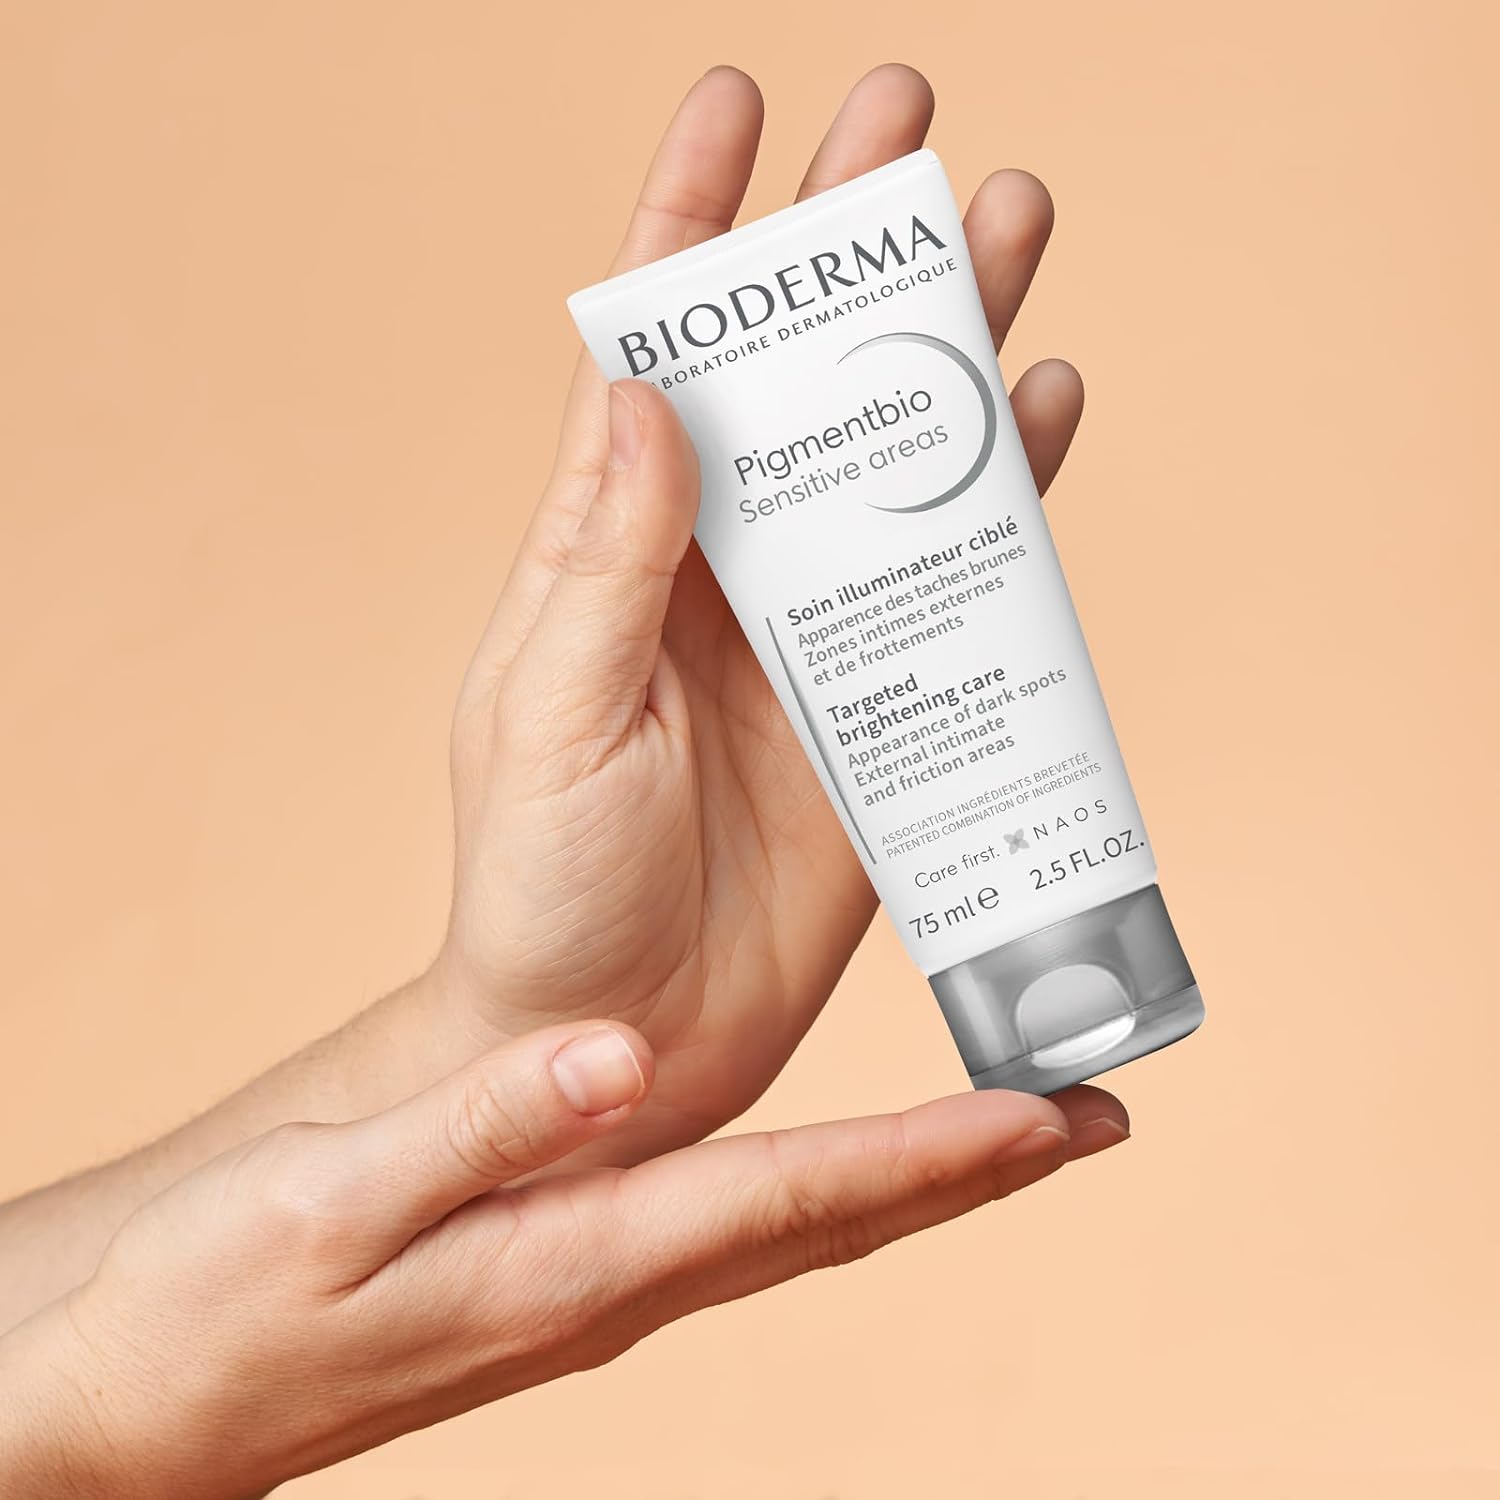 Bioderma Pigmentbio Sensitive Areas Unified And Brightened Skin Tone Even For The Most Delicate Areas -75ml : Beauty & Personal Care